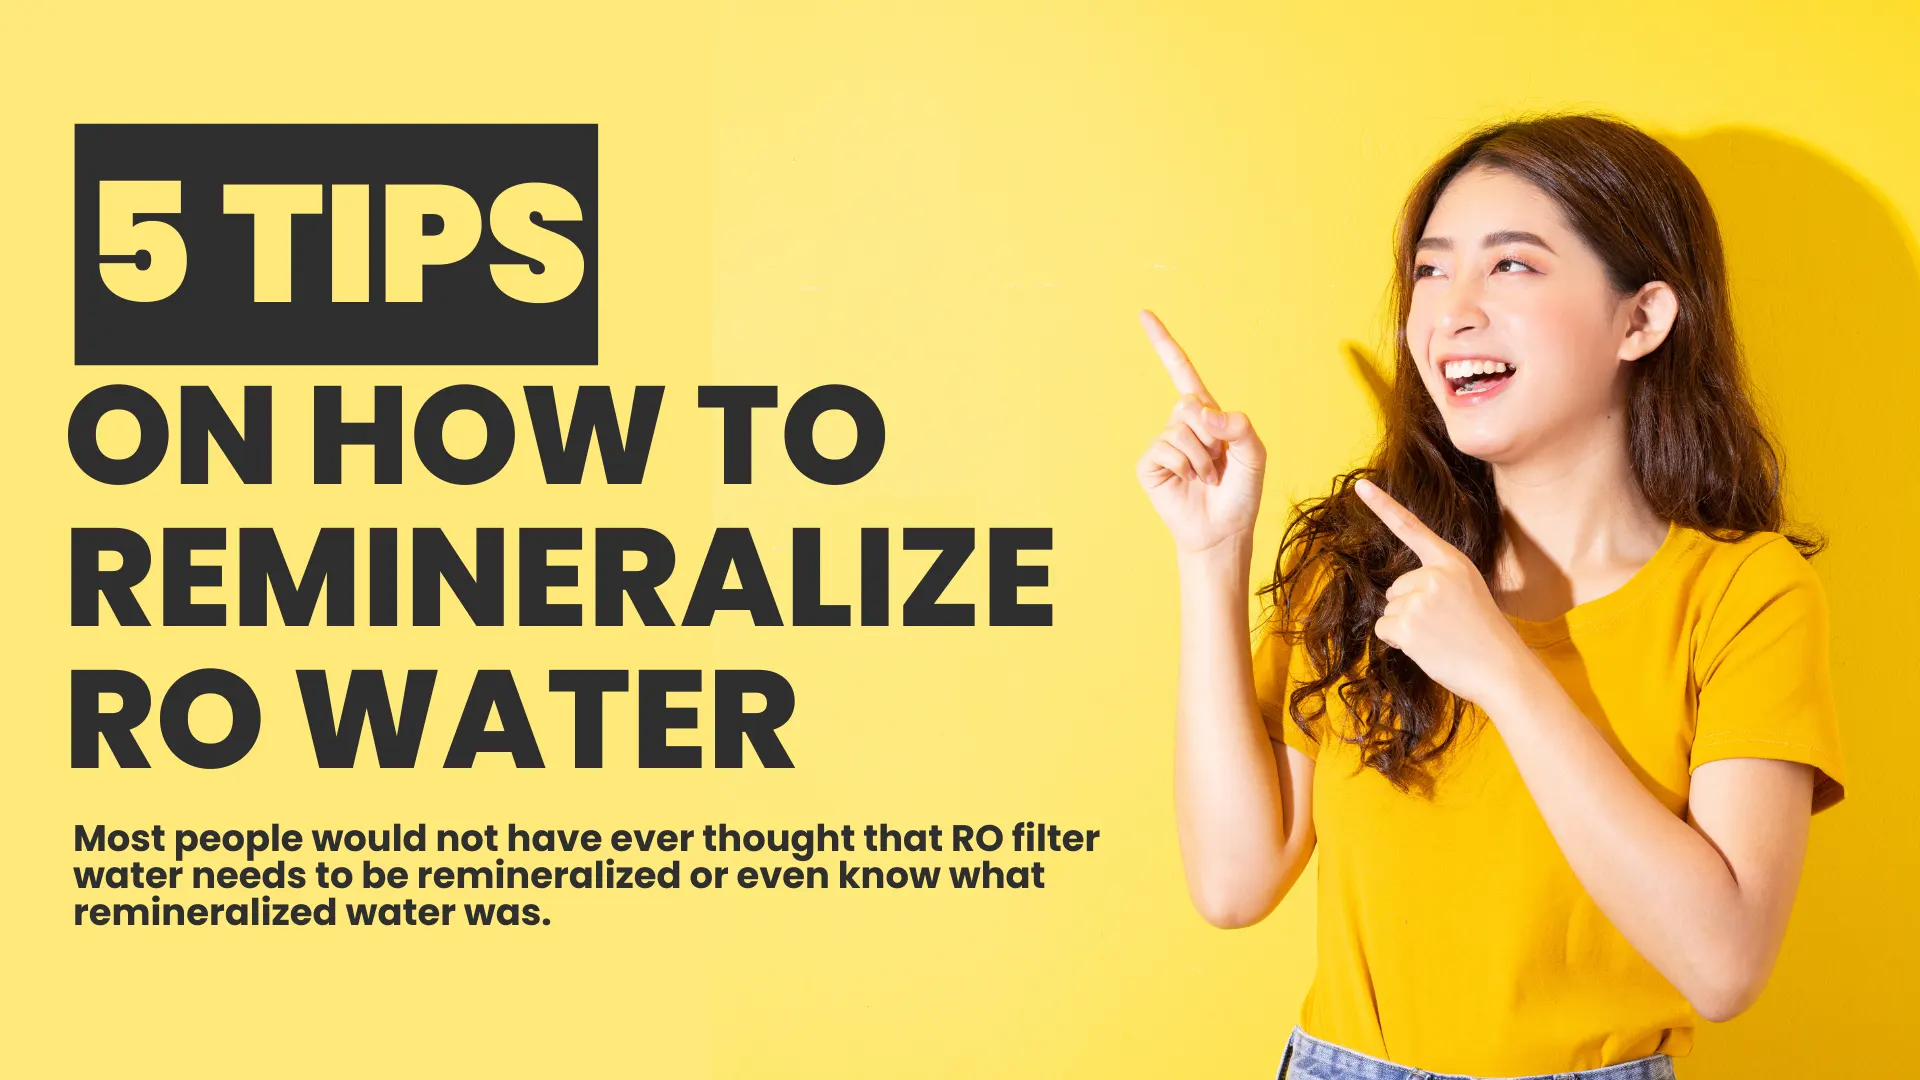 5 Tips On How To Remineralize RO Water